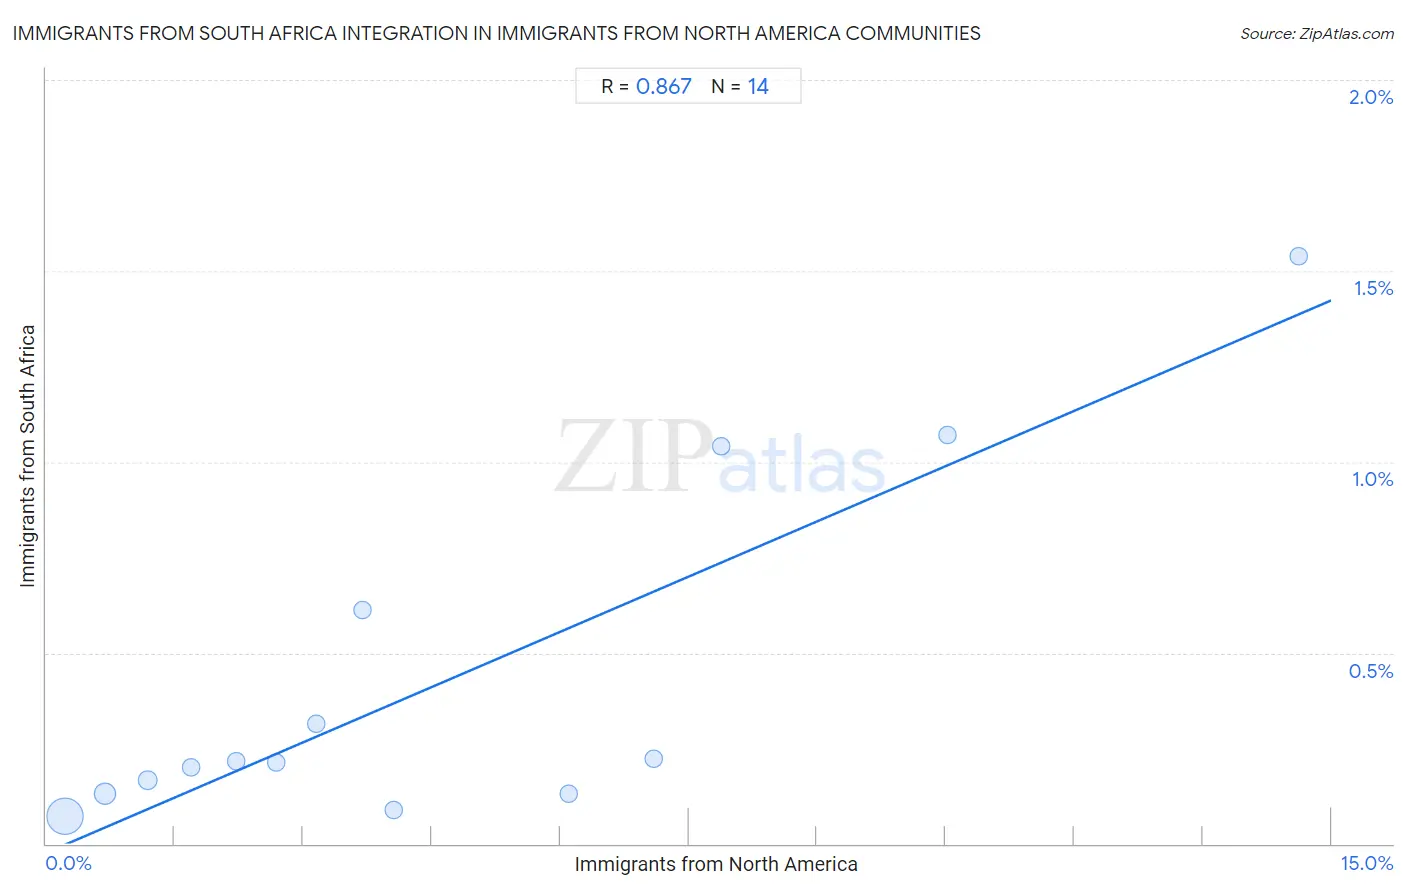 Immigrants from North America Integration in Immigrants from South Africa Communities